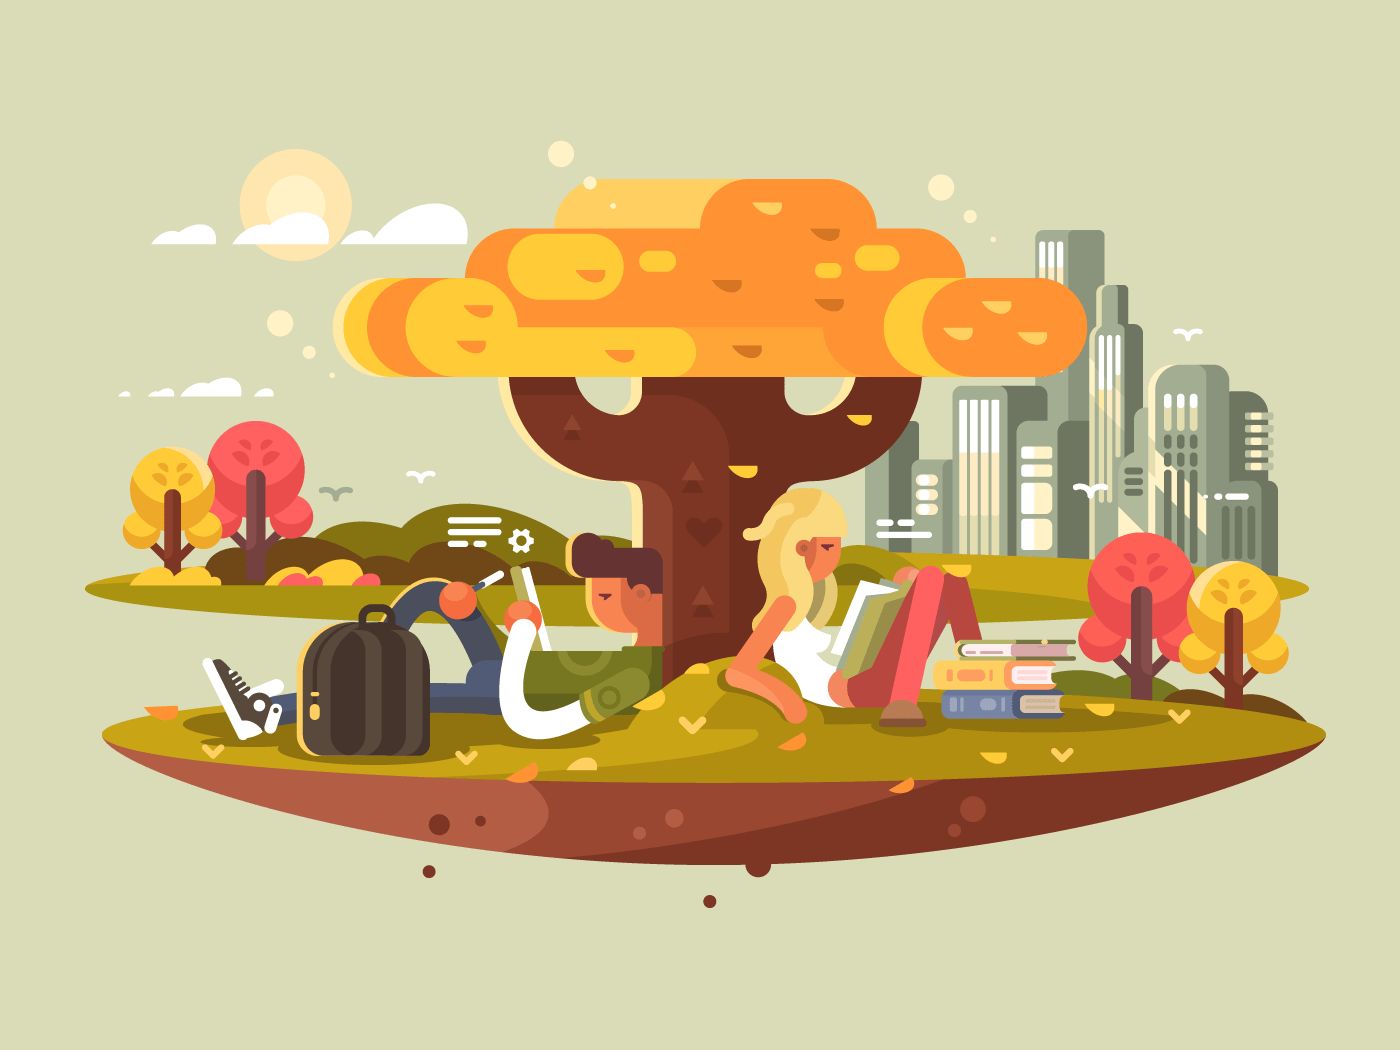 Students studying in park flat vector illustration